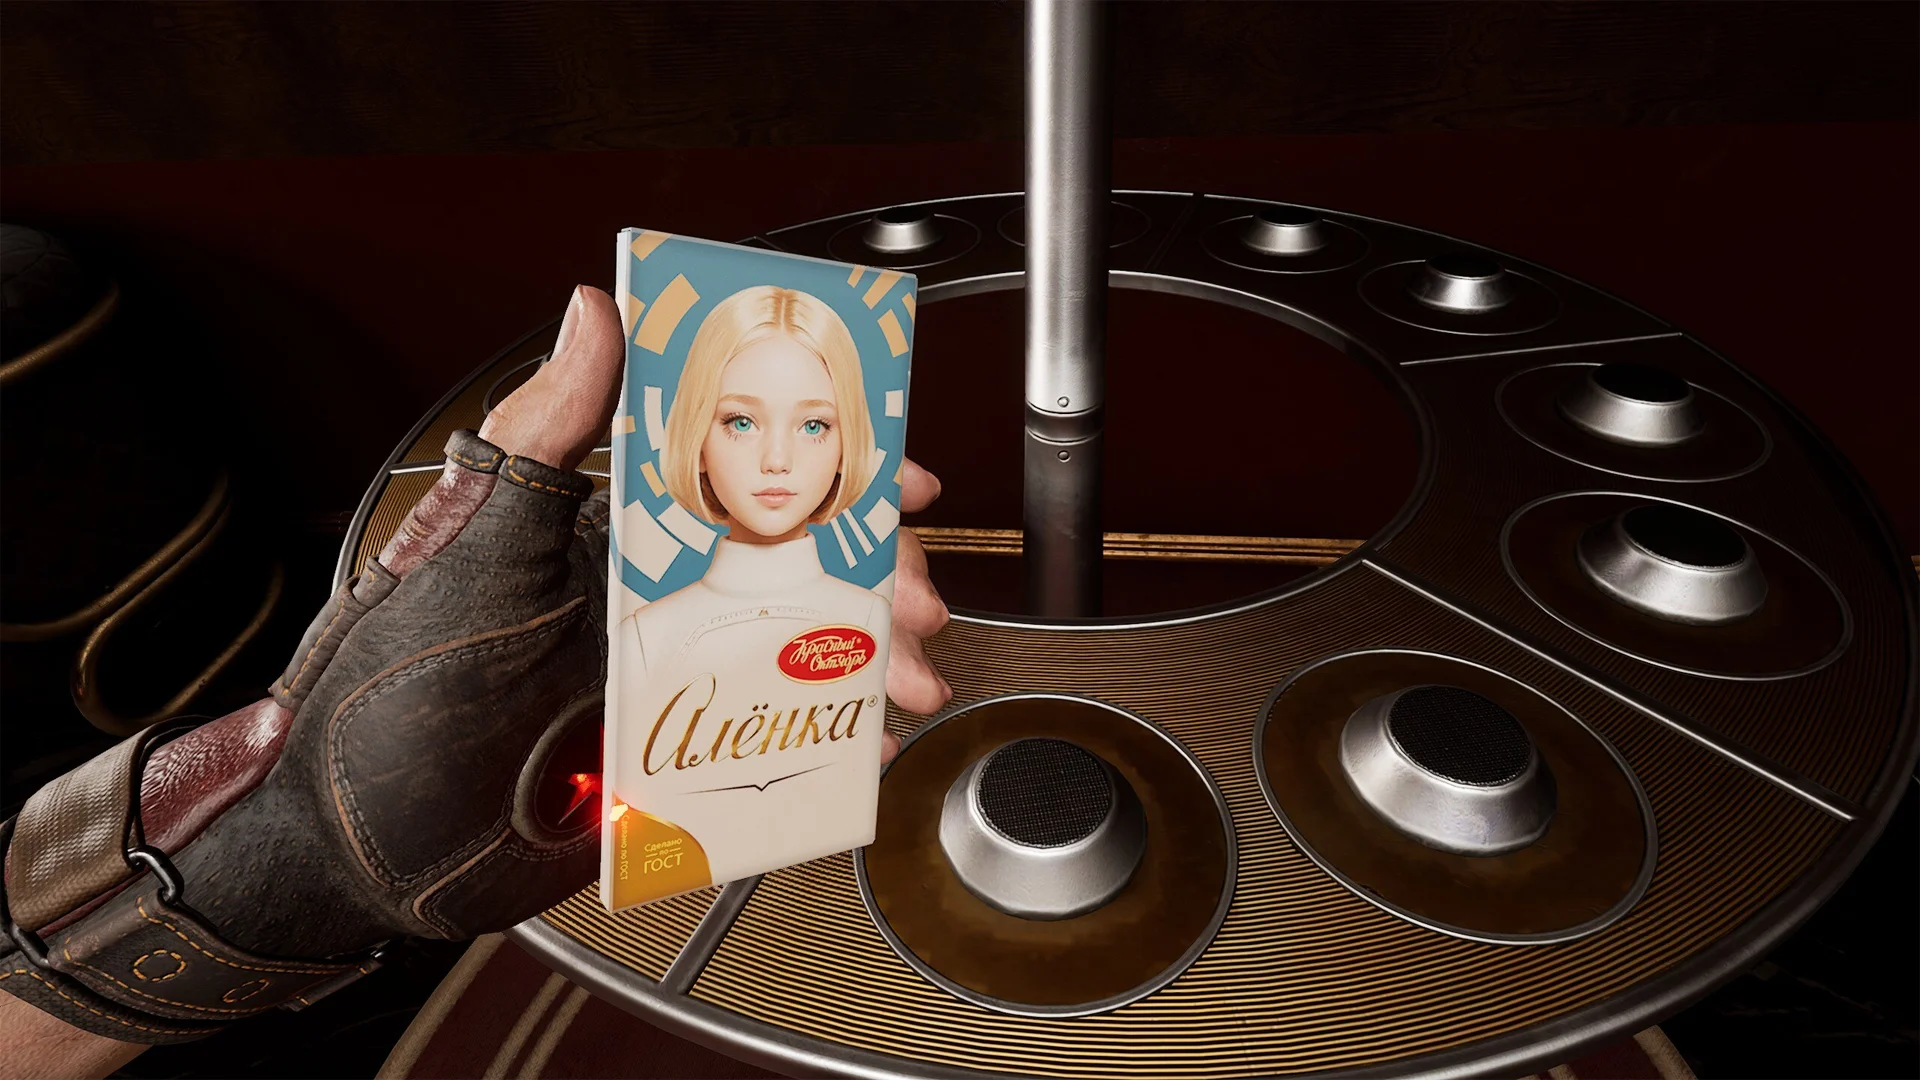 Chocolate "Alenka" from Atomic Heart will be released in reality